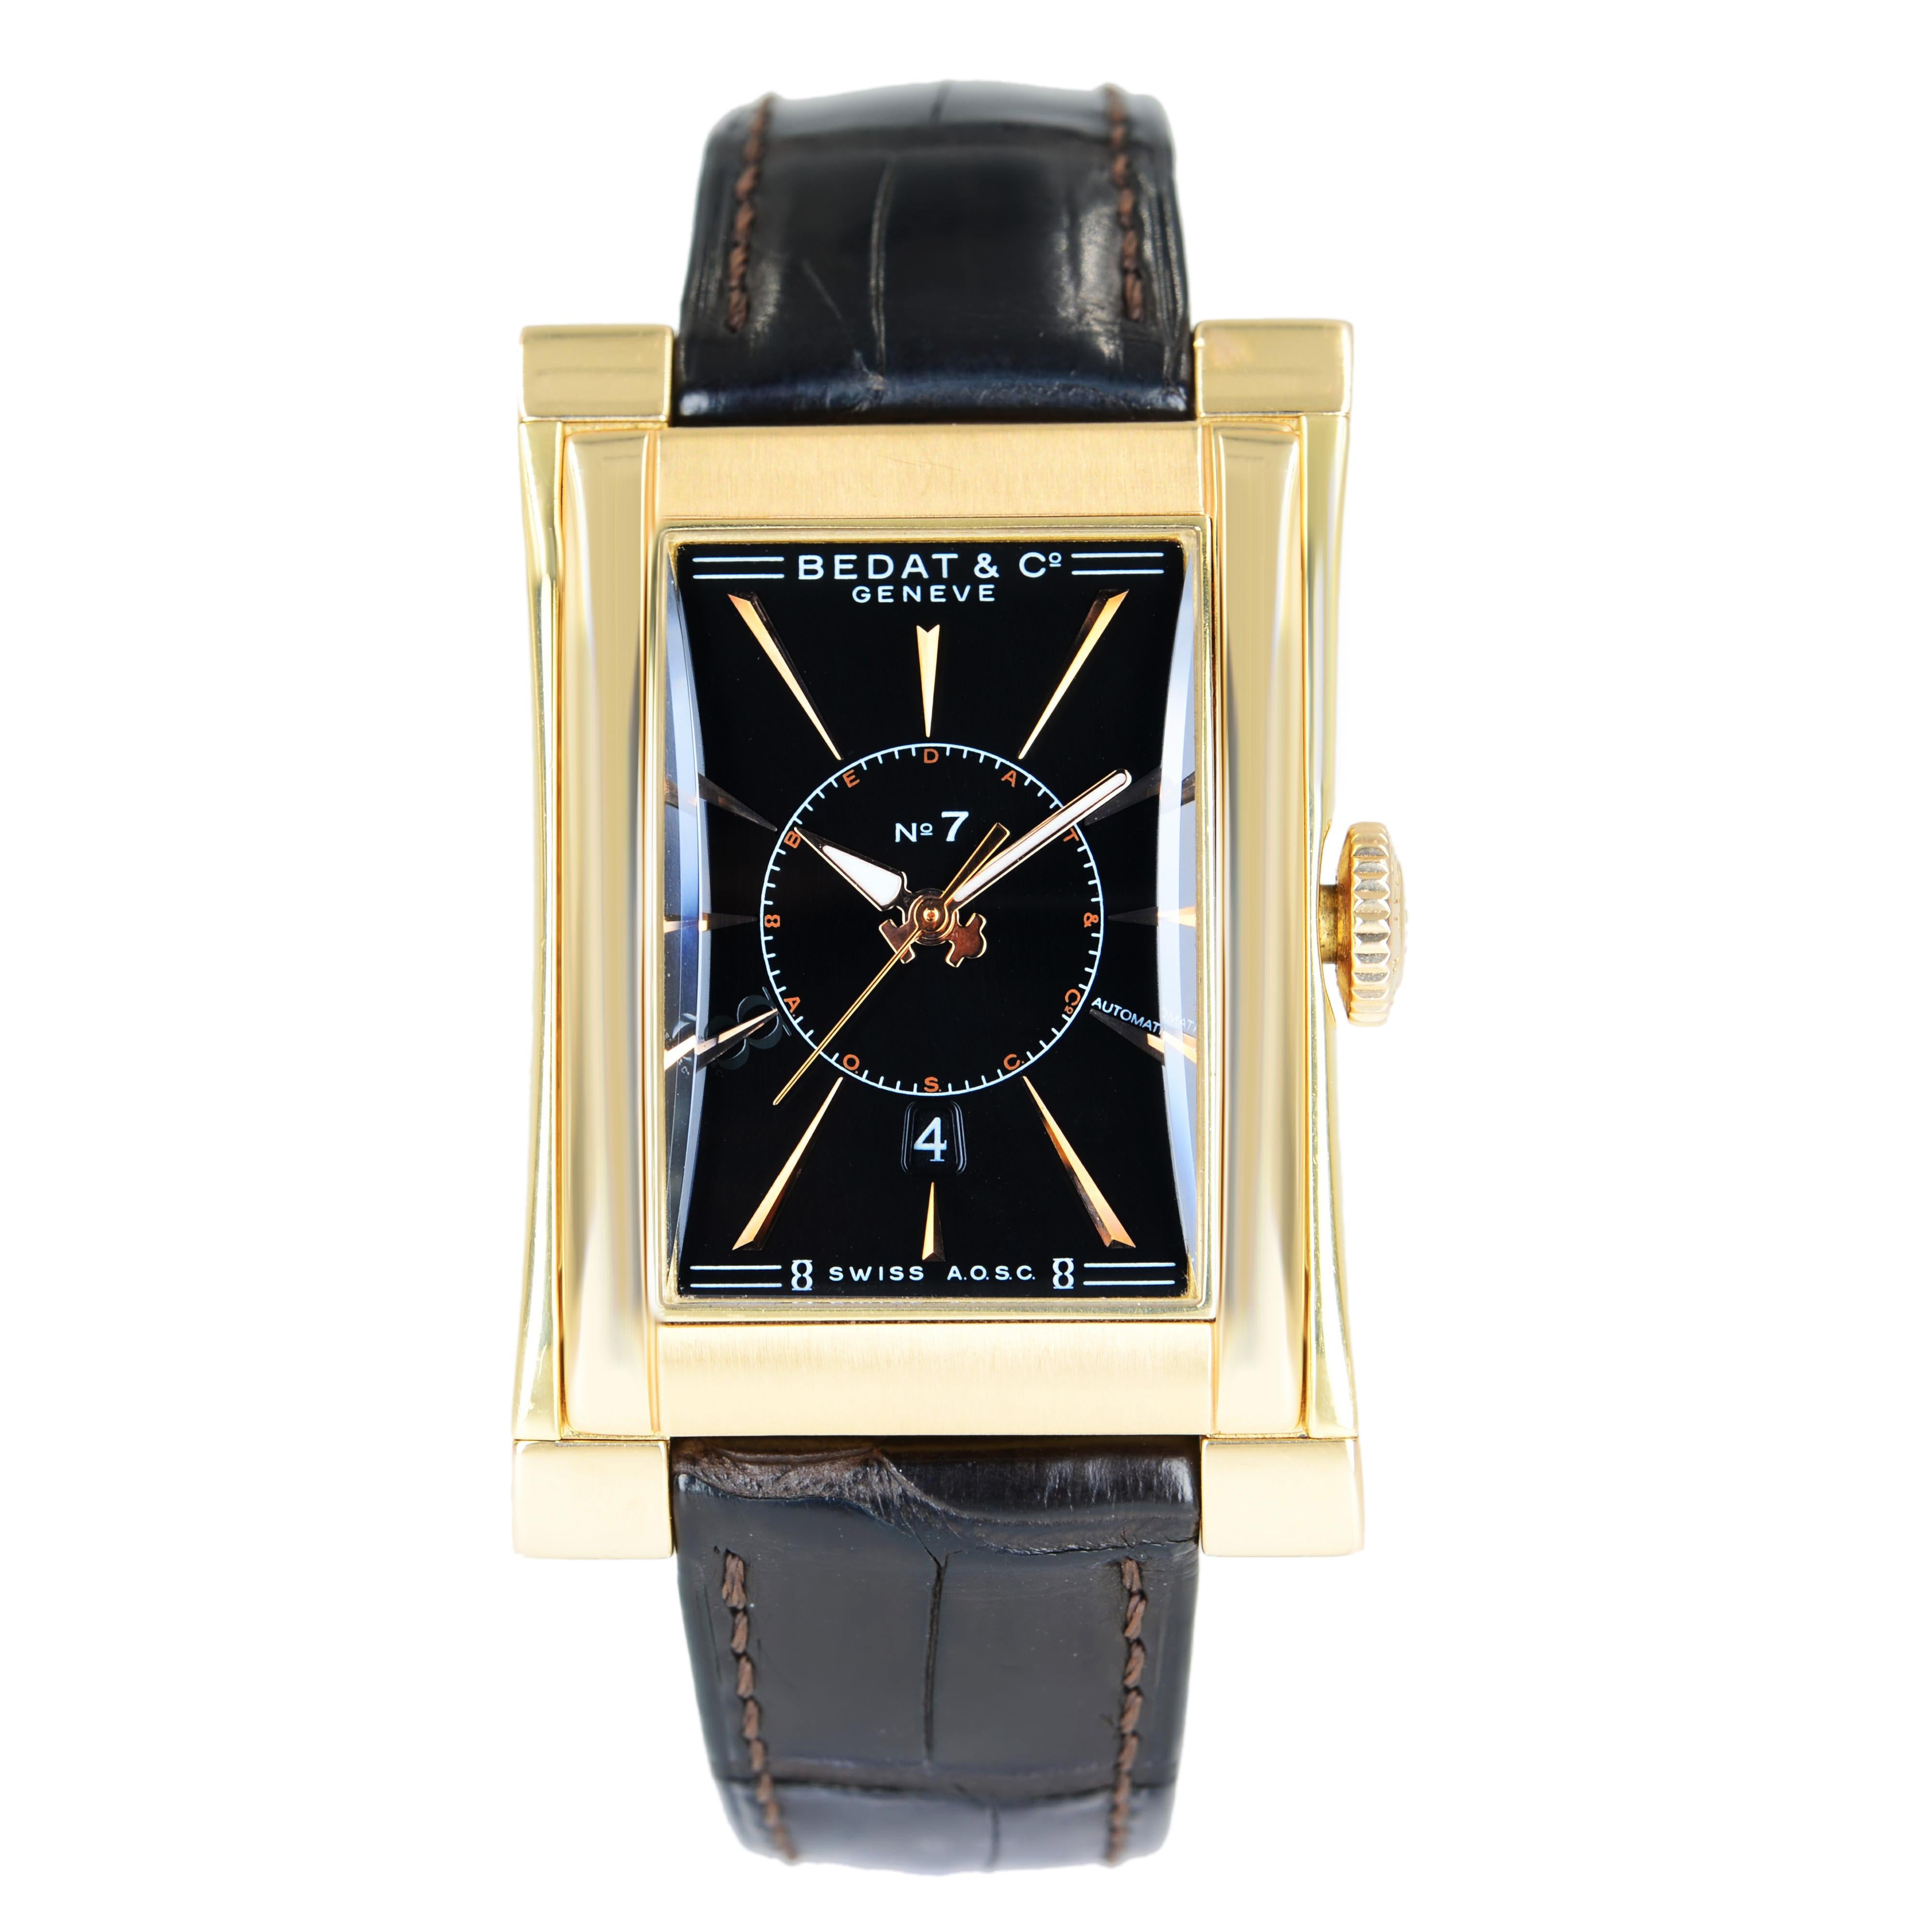 Bedat & Co No. 7 18k Gold Rectangle Black Dial Automatic Watch Ref 737 For Sale